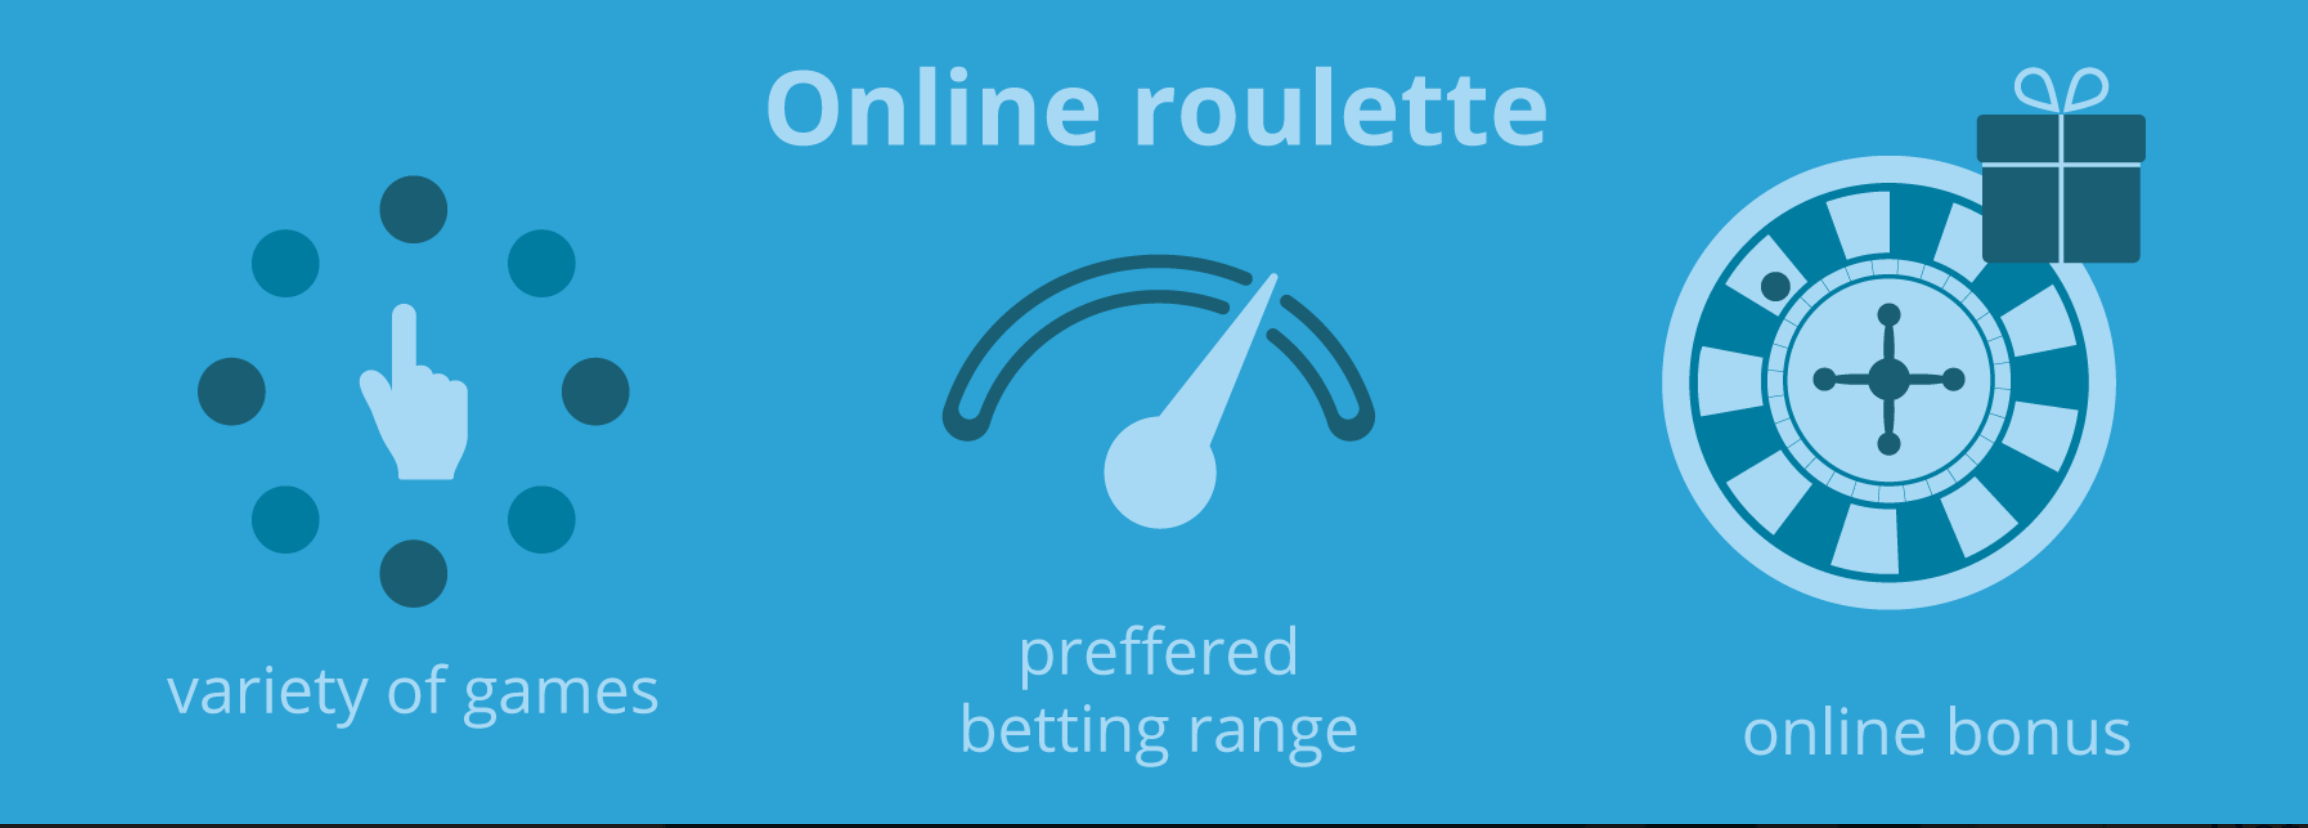 online roulette infographics